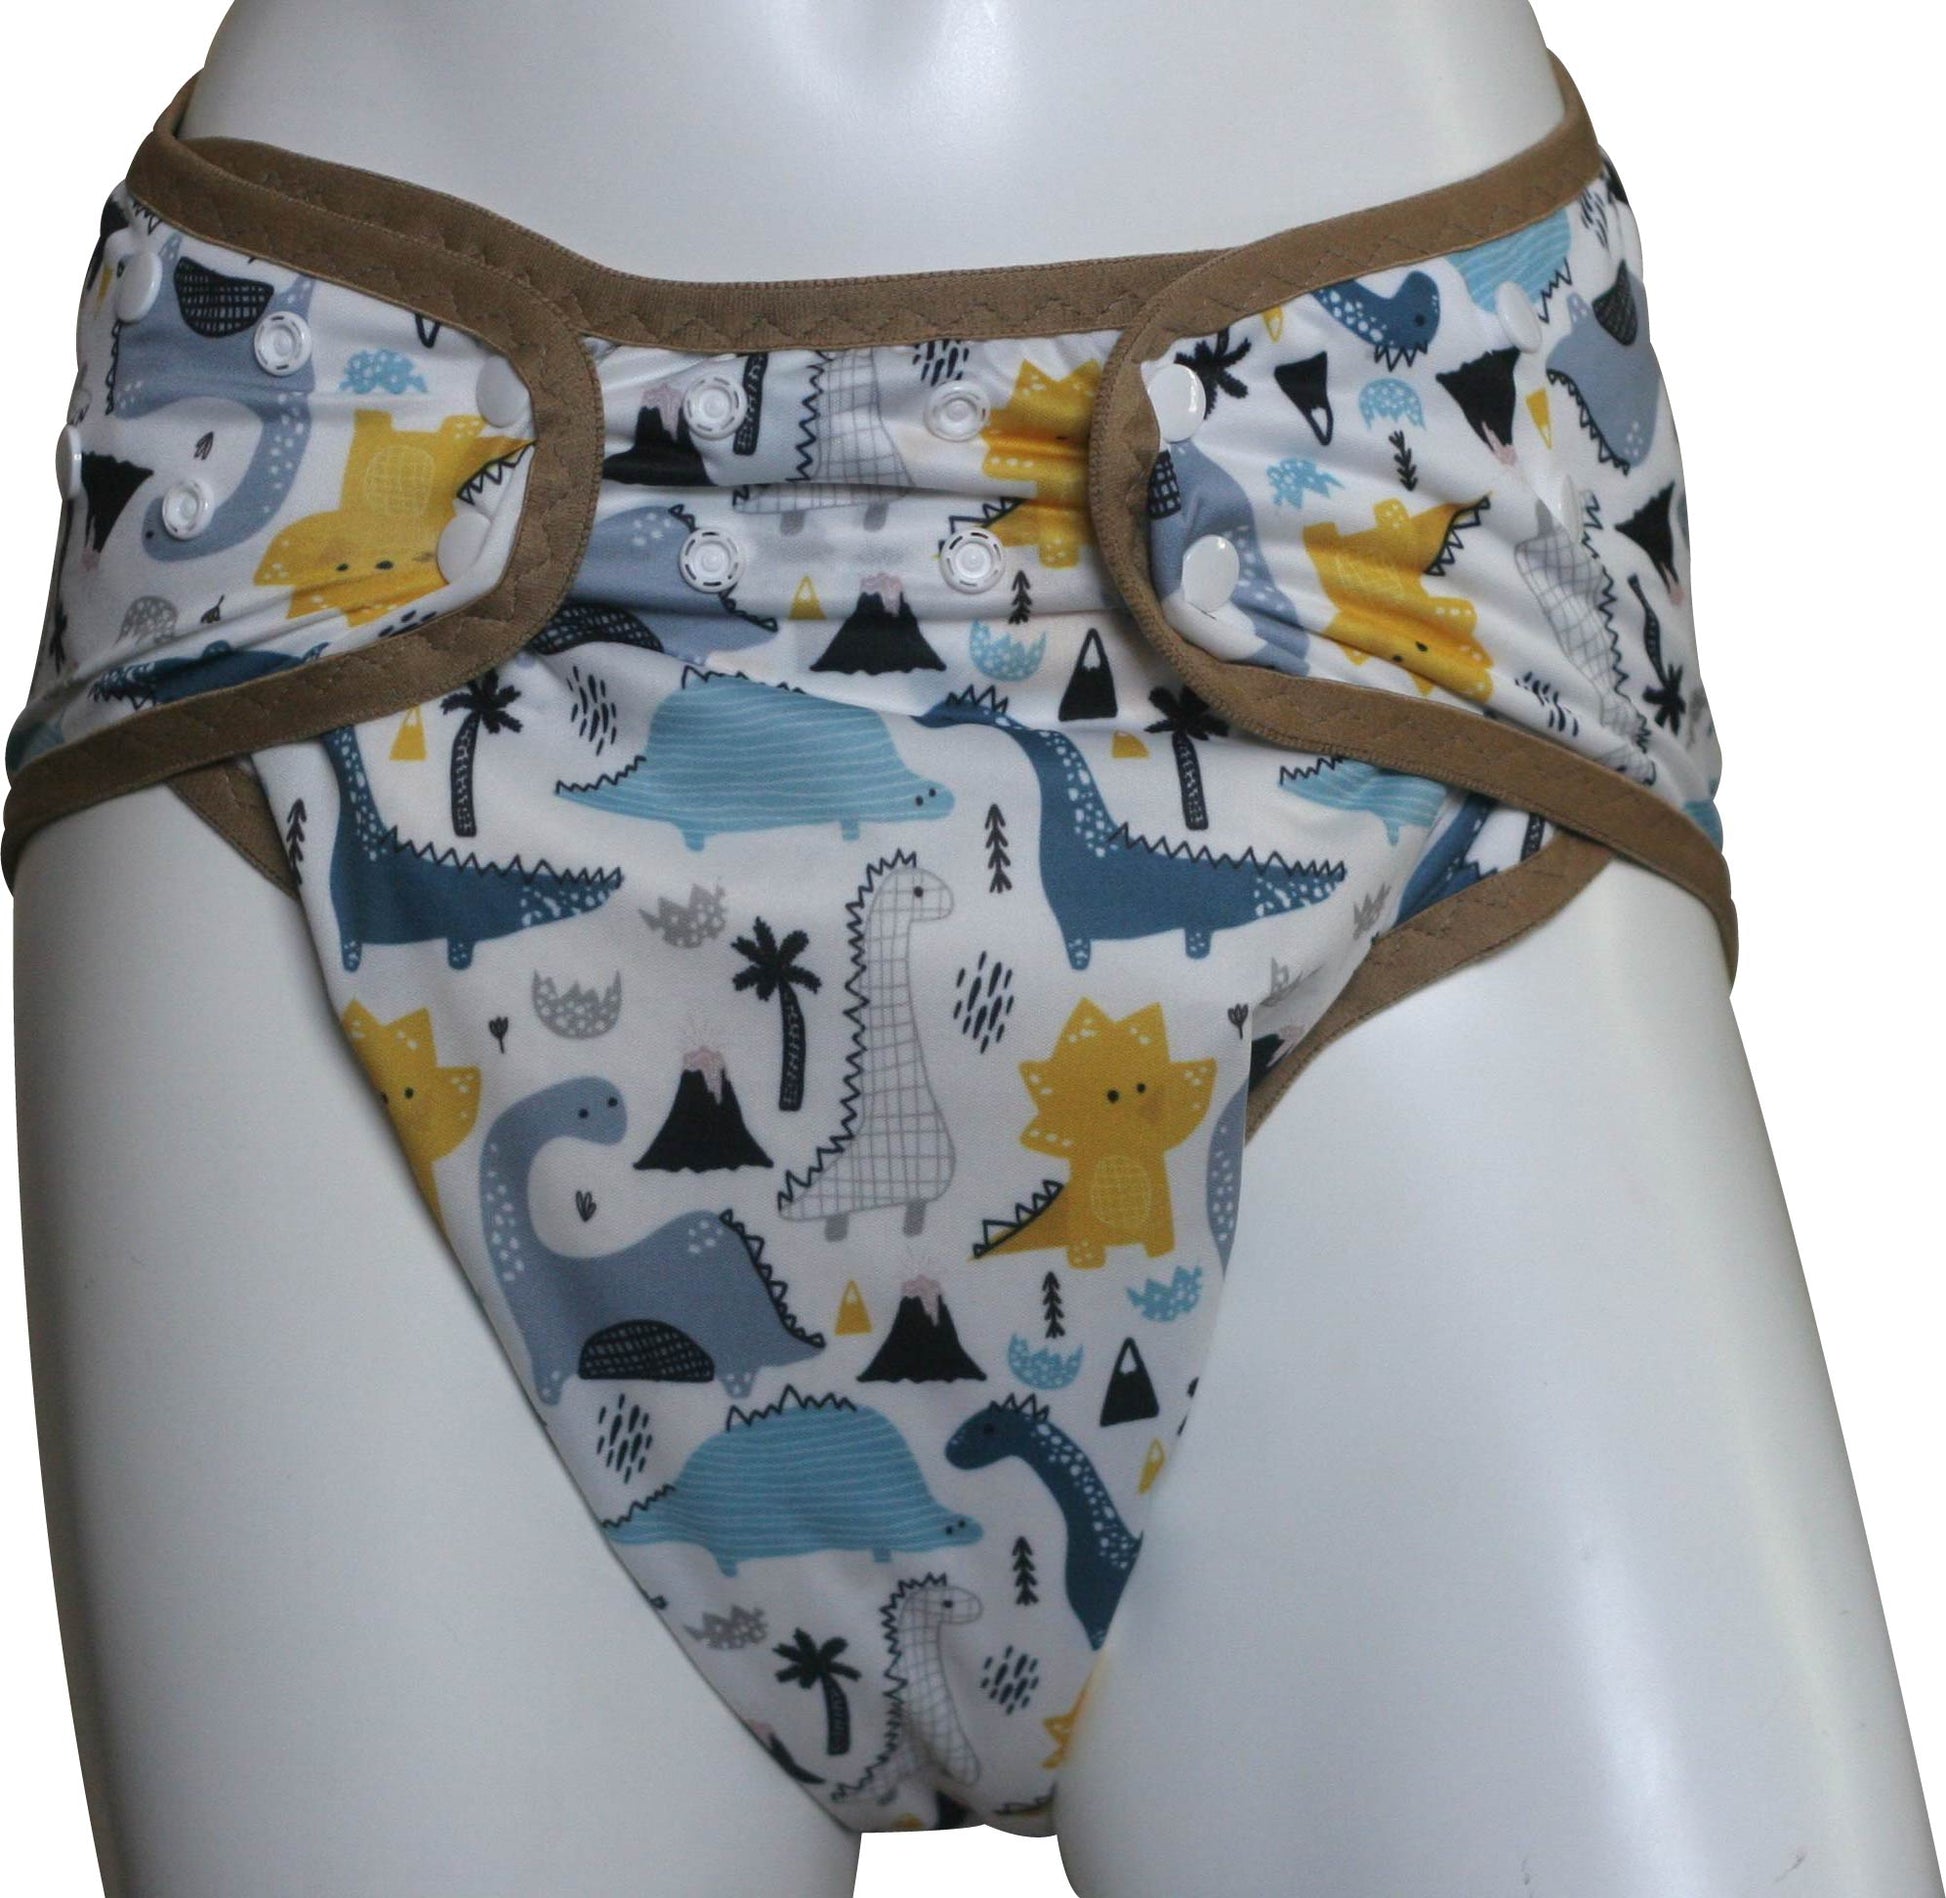 All in one style diaper with fold over elastic and snaps.